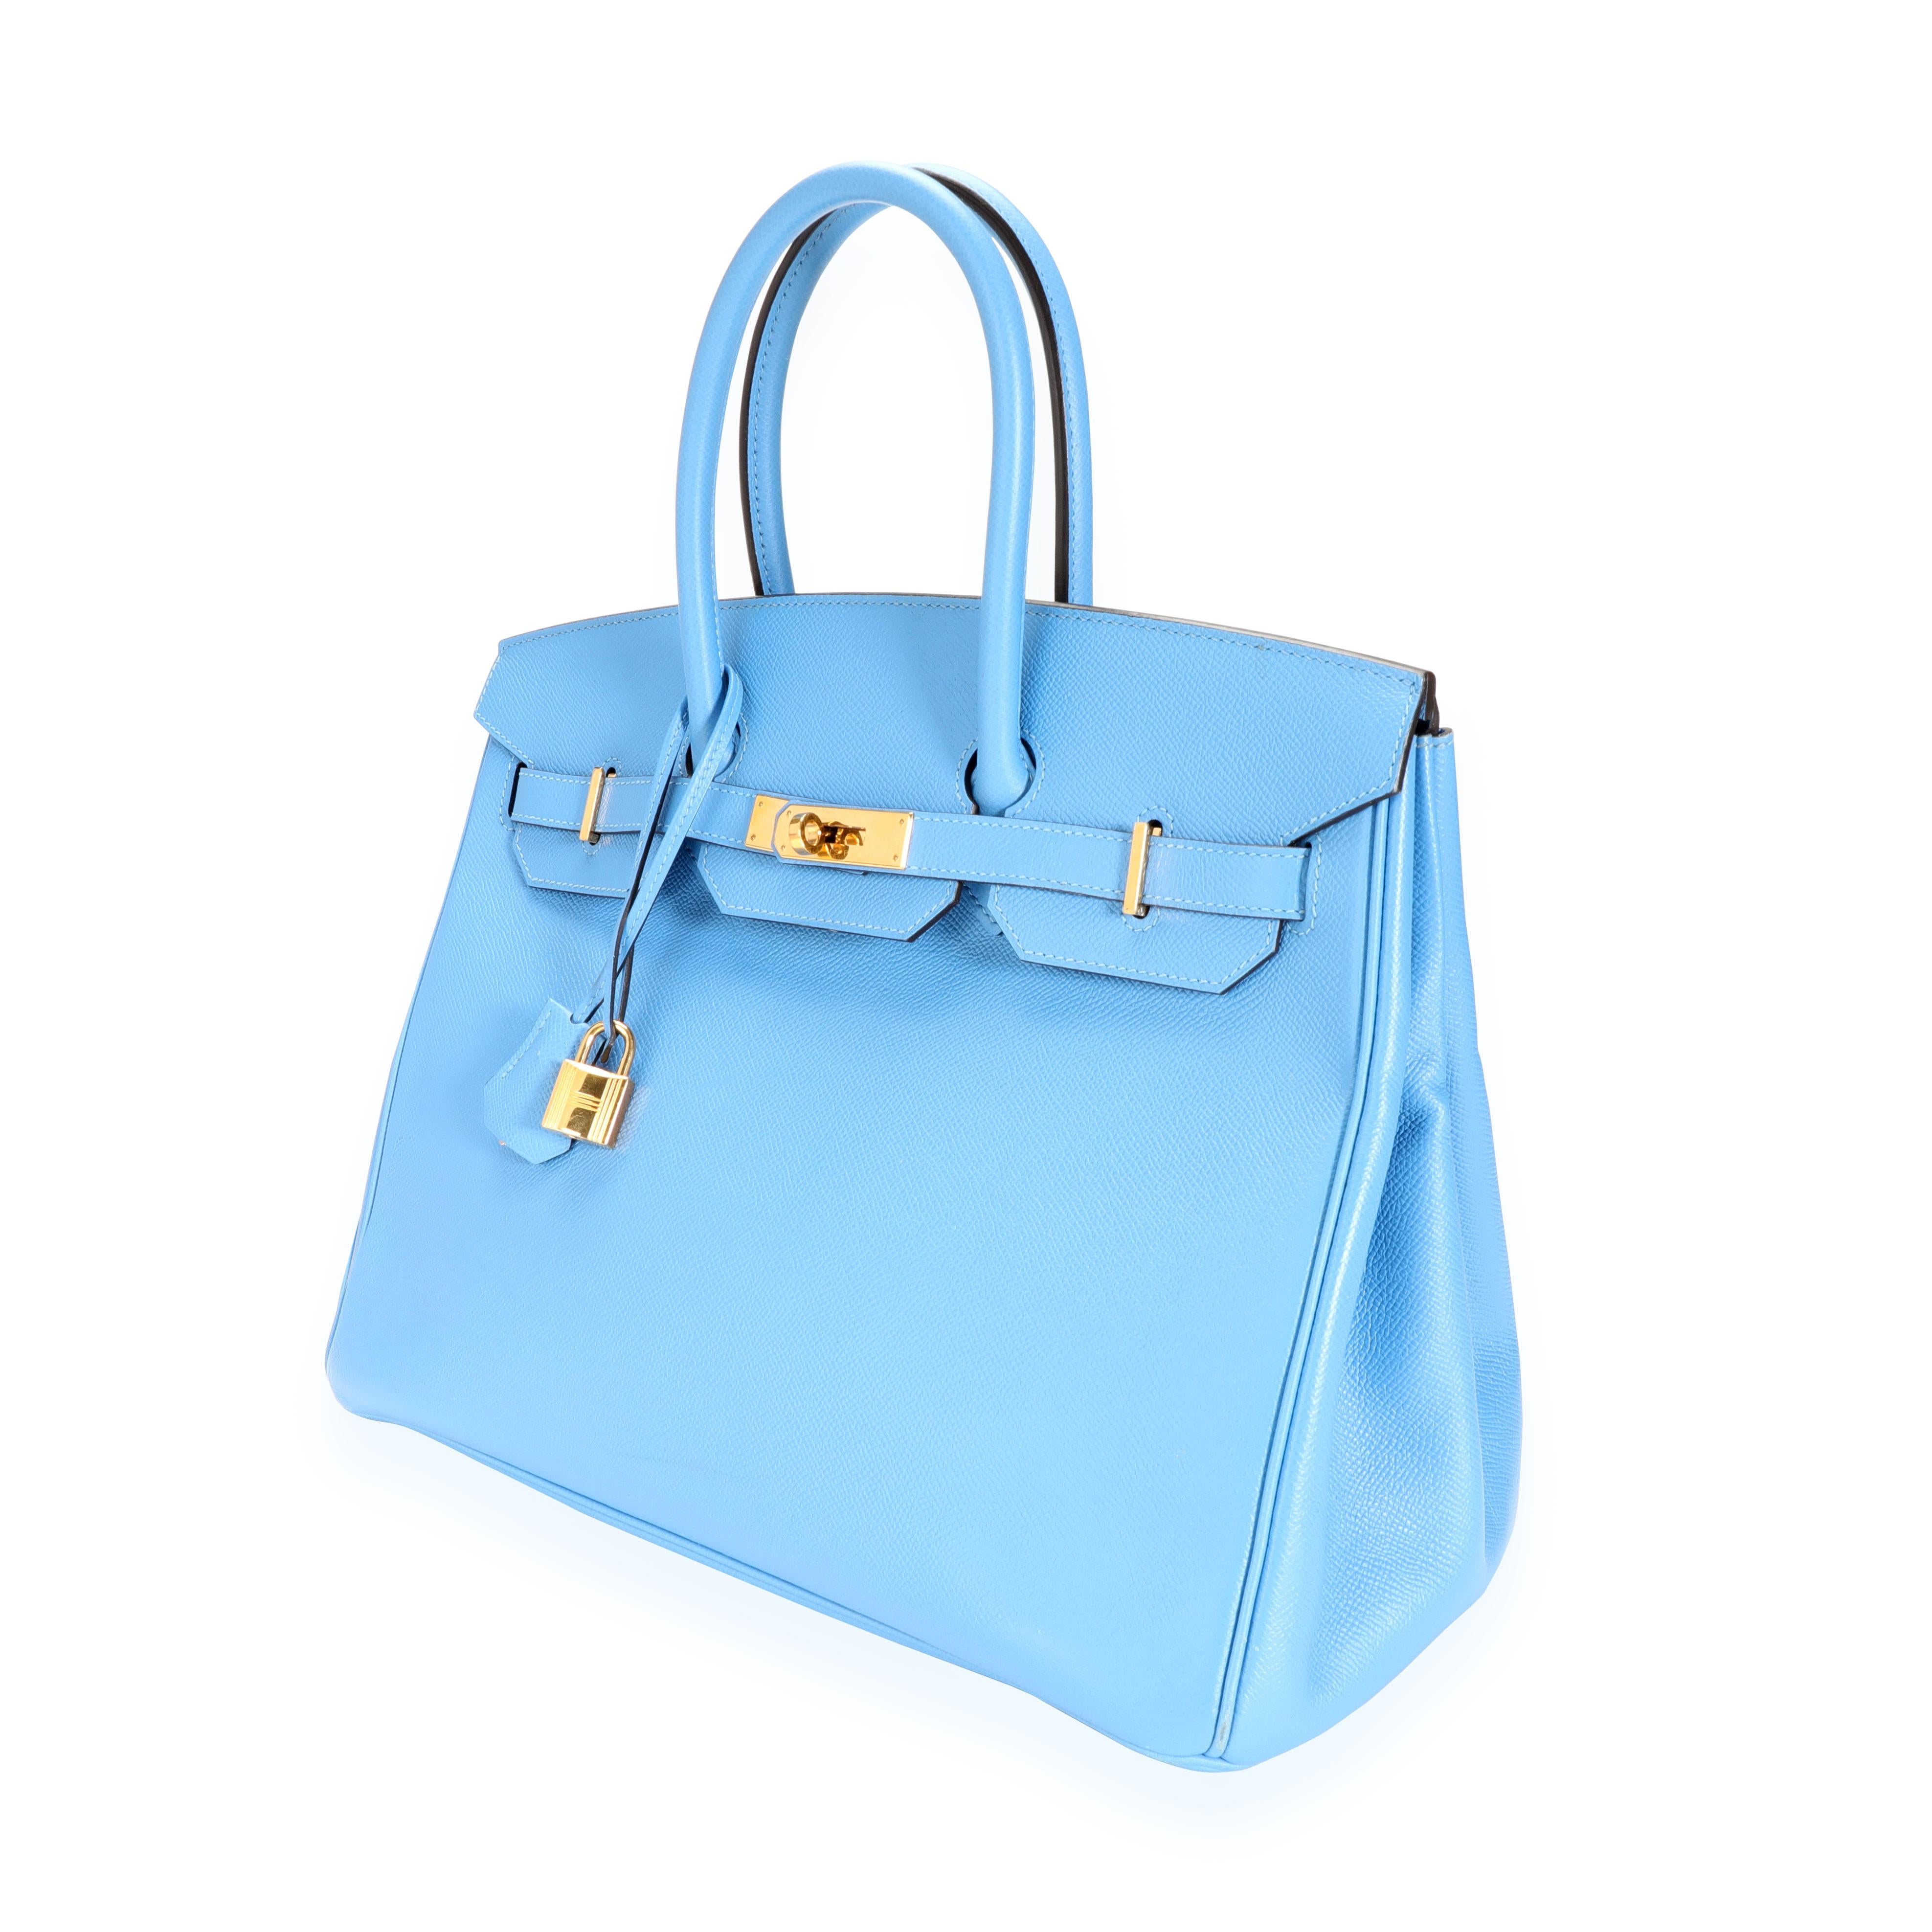 Hermès Bleu Paradise Epsom Birkin 35 GHW
SKU: 111556
MSRP:  
Condition: Pre-owned (3000)
Condition Description: 
Handbag Condition: Good
Condition Comments: Good Condition. Scuffing and darkening to corners. Marks throughout exterior. Scratching to